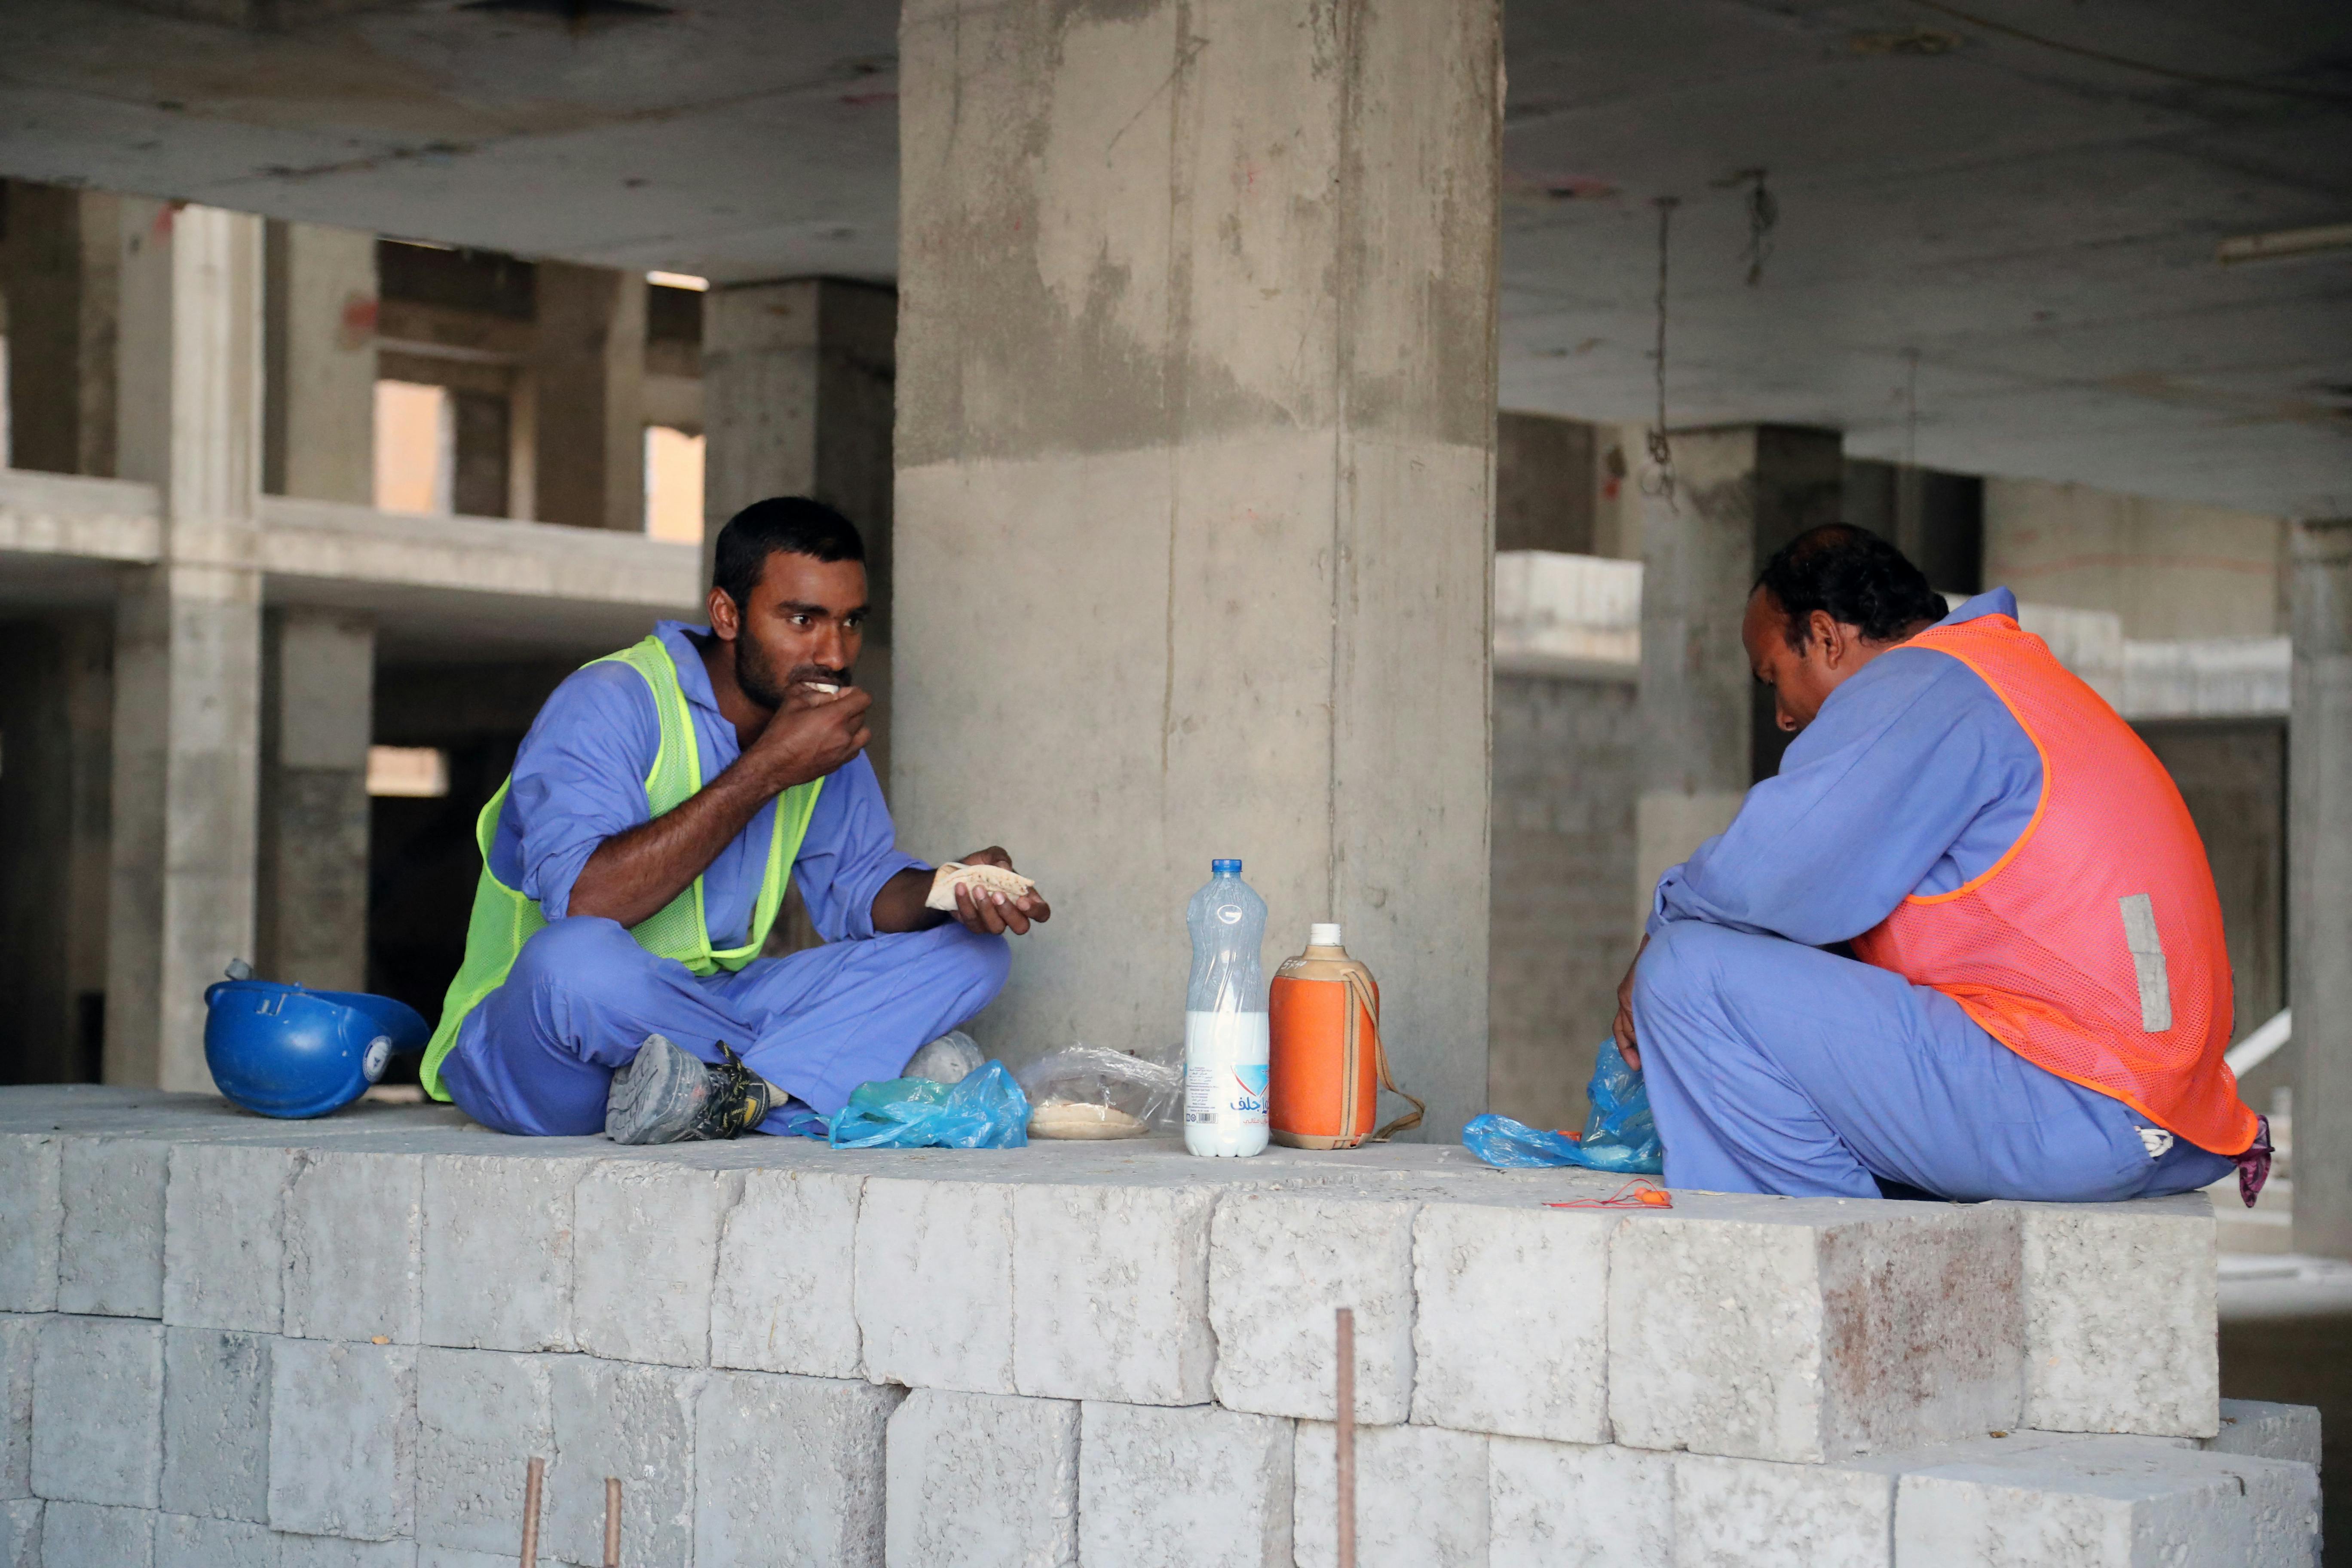 Migrant workers eat during a break at a construction site in the Qatari capital Doha on December 6, 2016. - Ever since being chosen as the 2022 World Cup host, Qatar's labour laws have been internationally condemned and kafala has been at the heart of that criticism. (Photo by STRINGER / AFP) / Qatar OUT / QATAR OUT